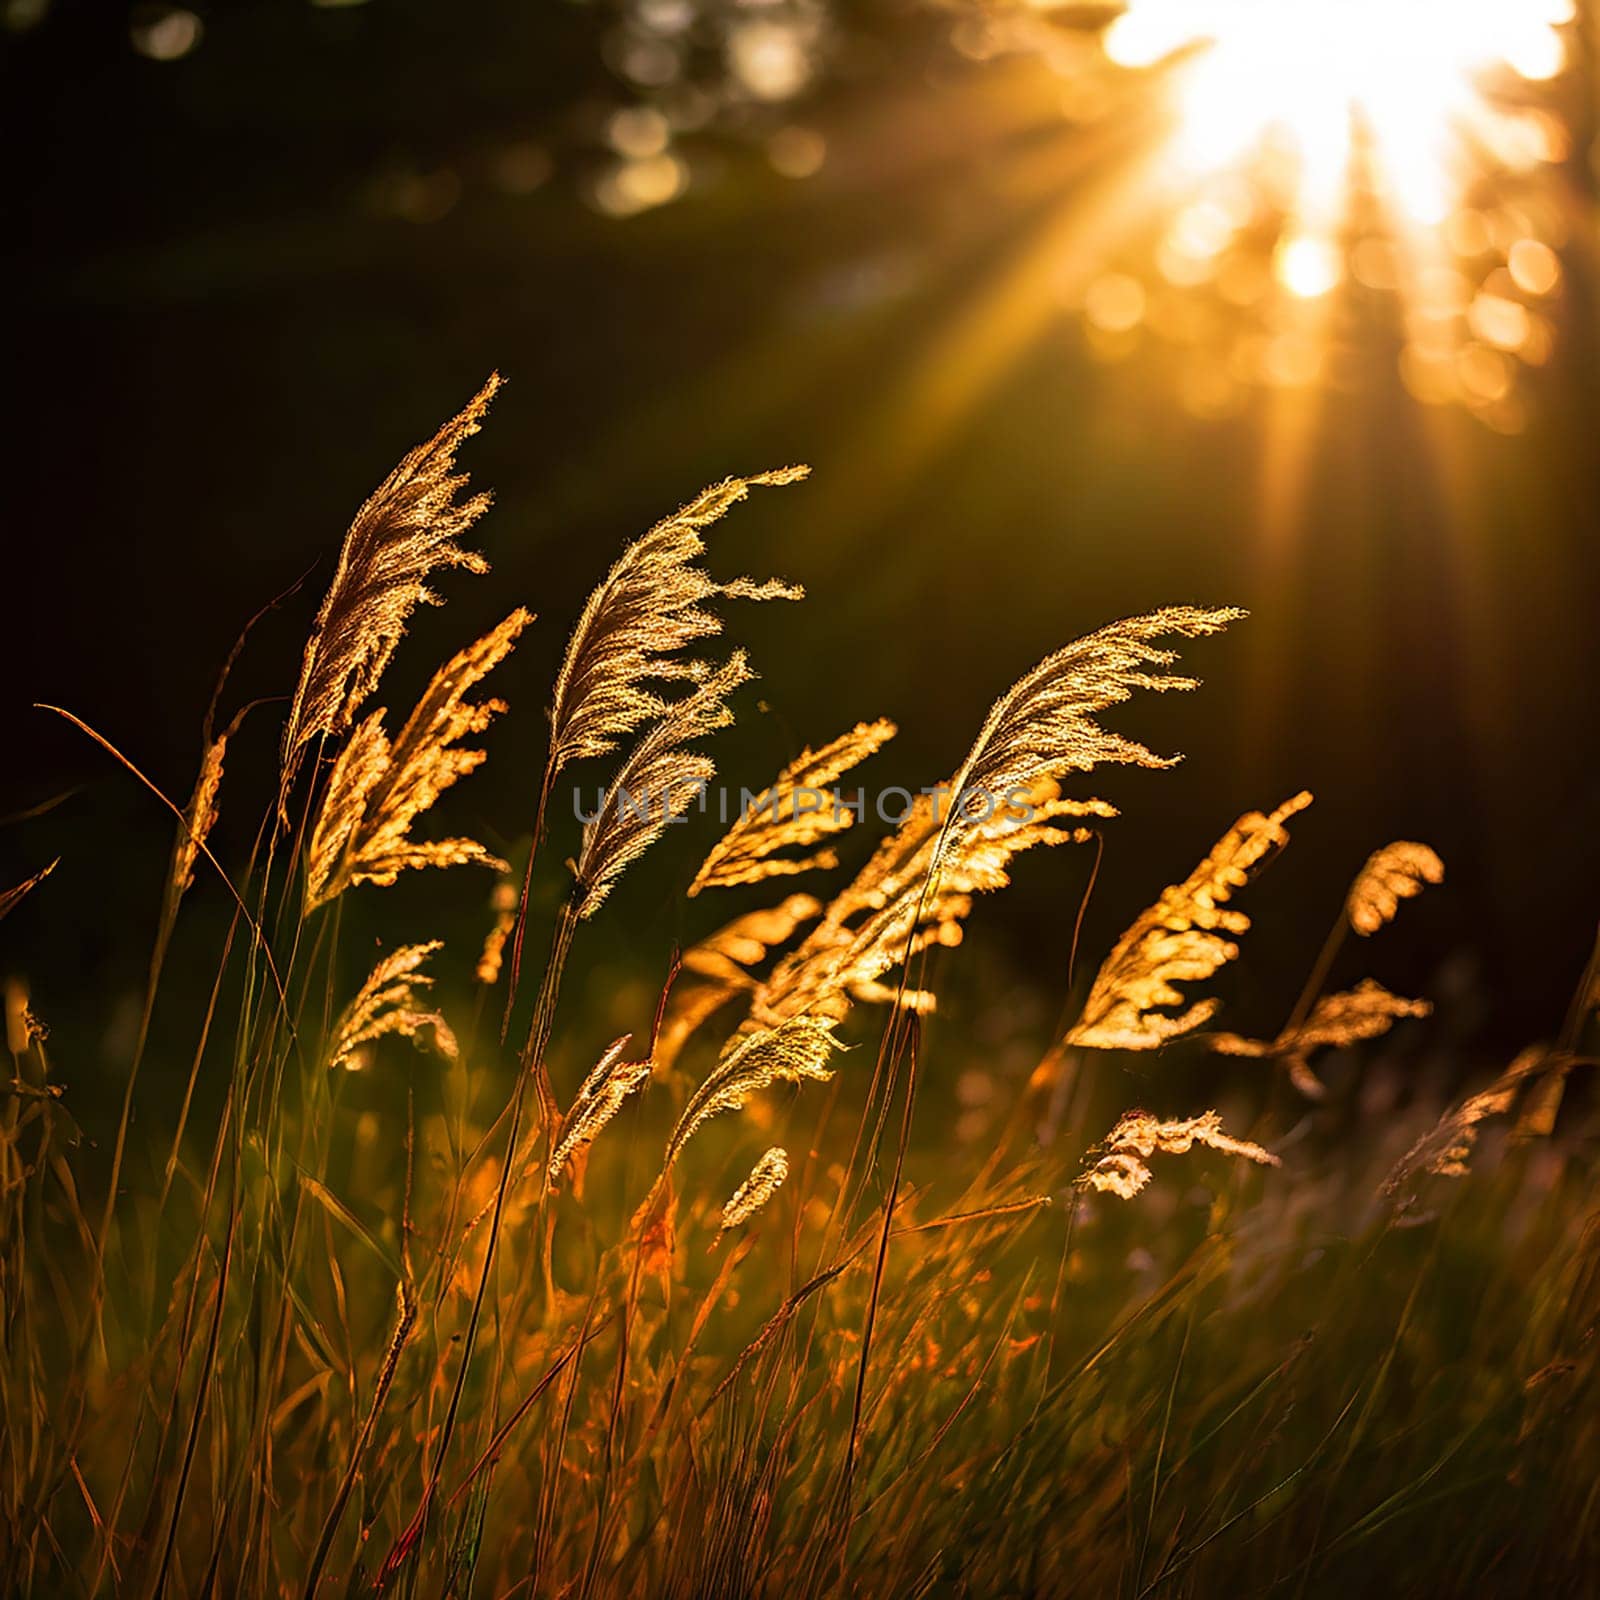 Sun-Kissed Meadow: Wildgrass Bathed in the Warmth of Sunlight